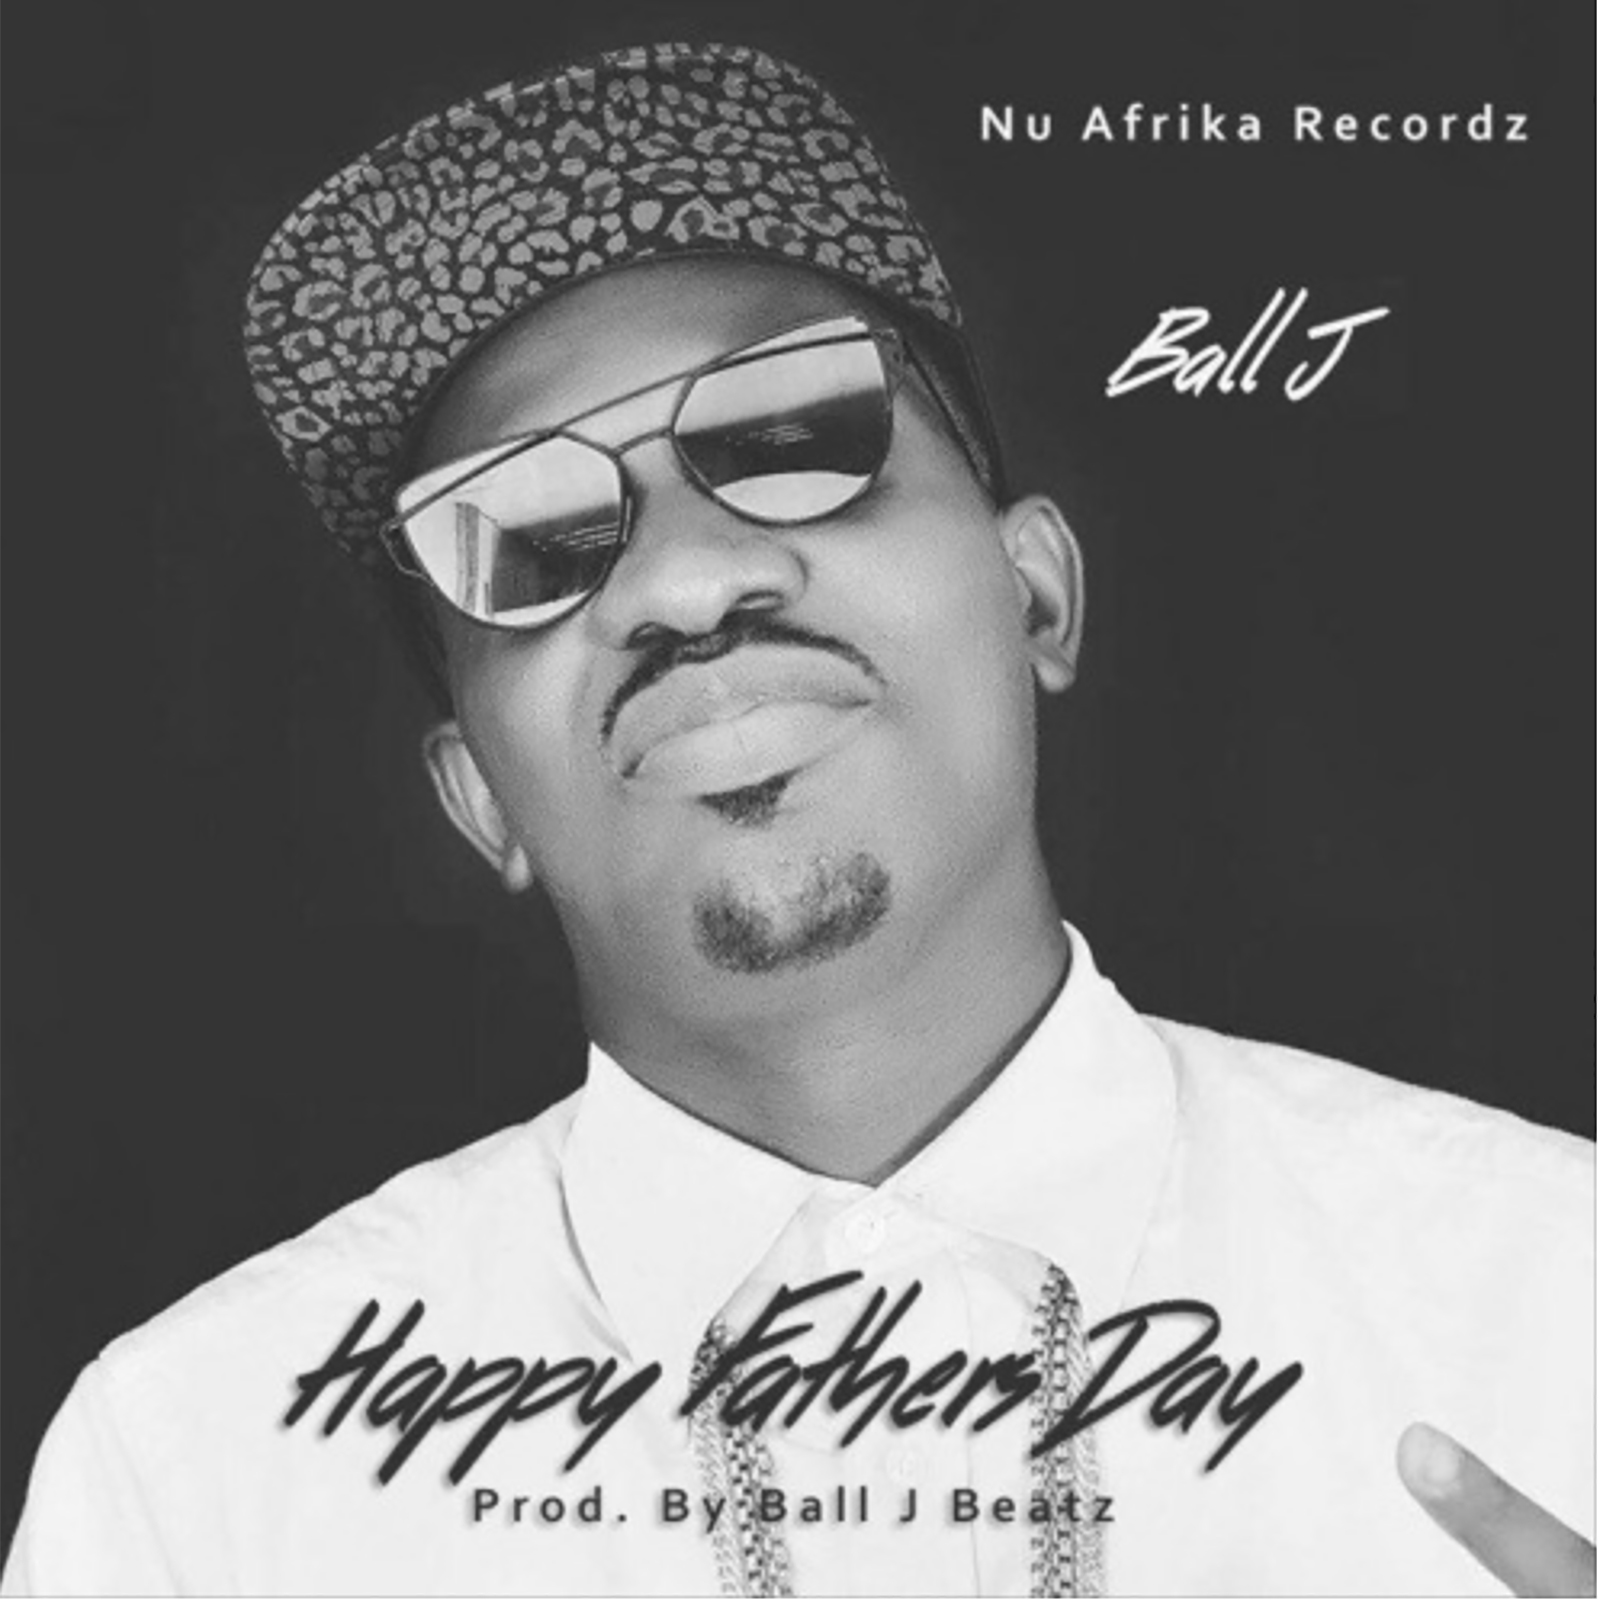 Fathers Day by Ball J